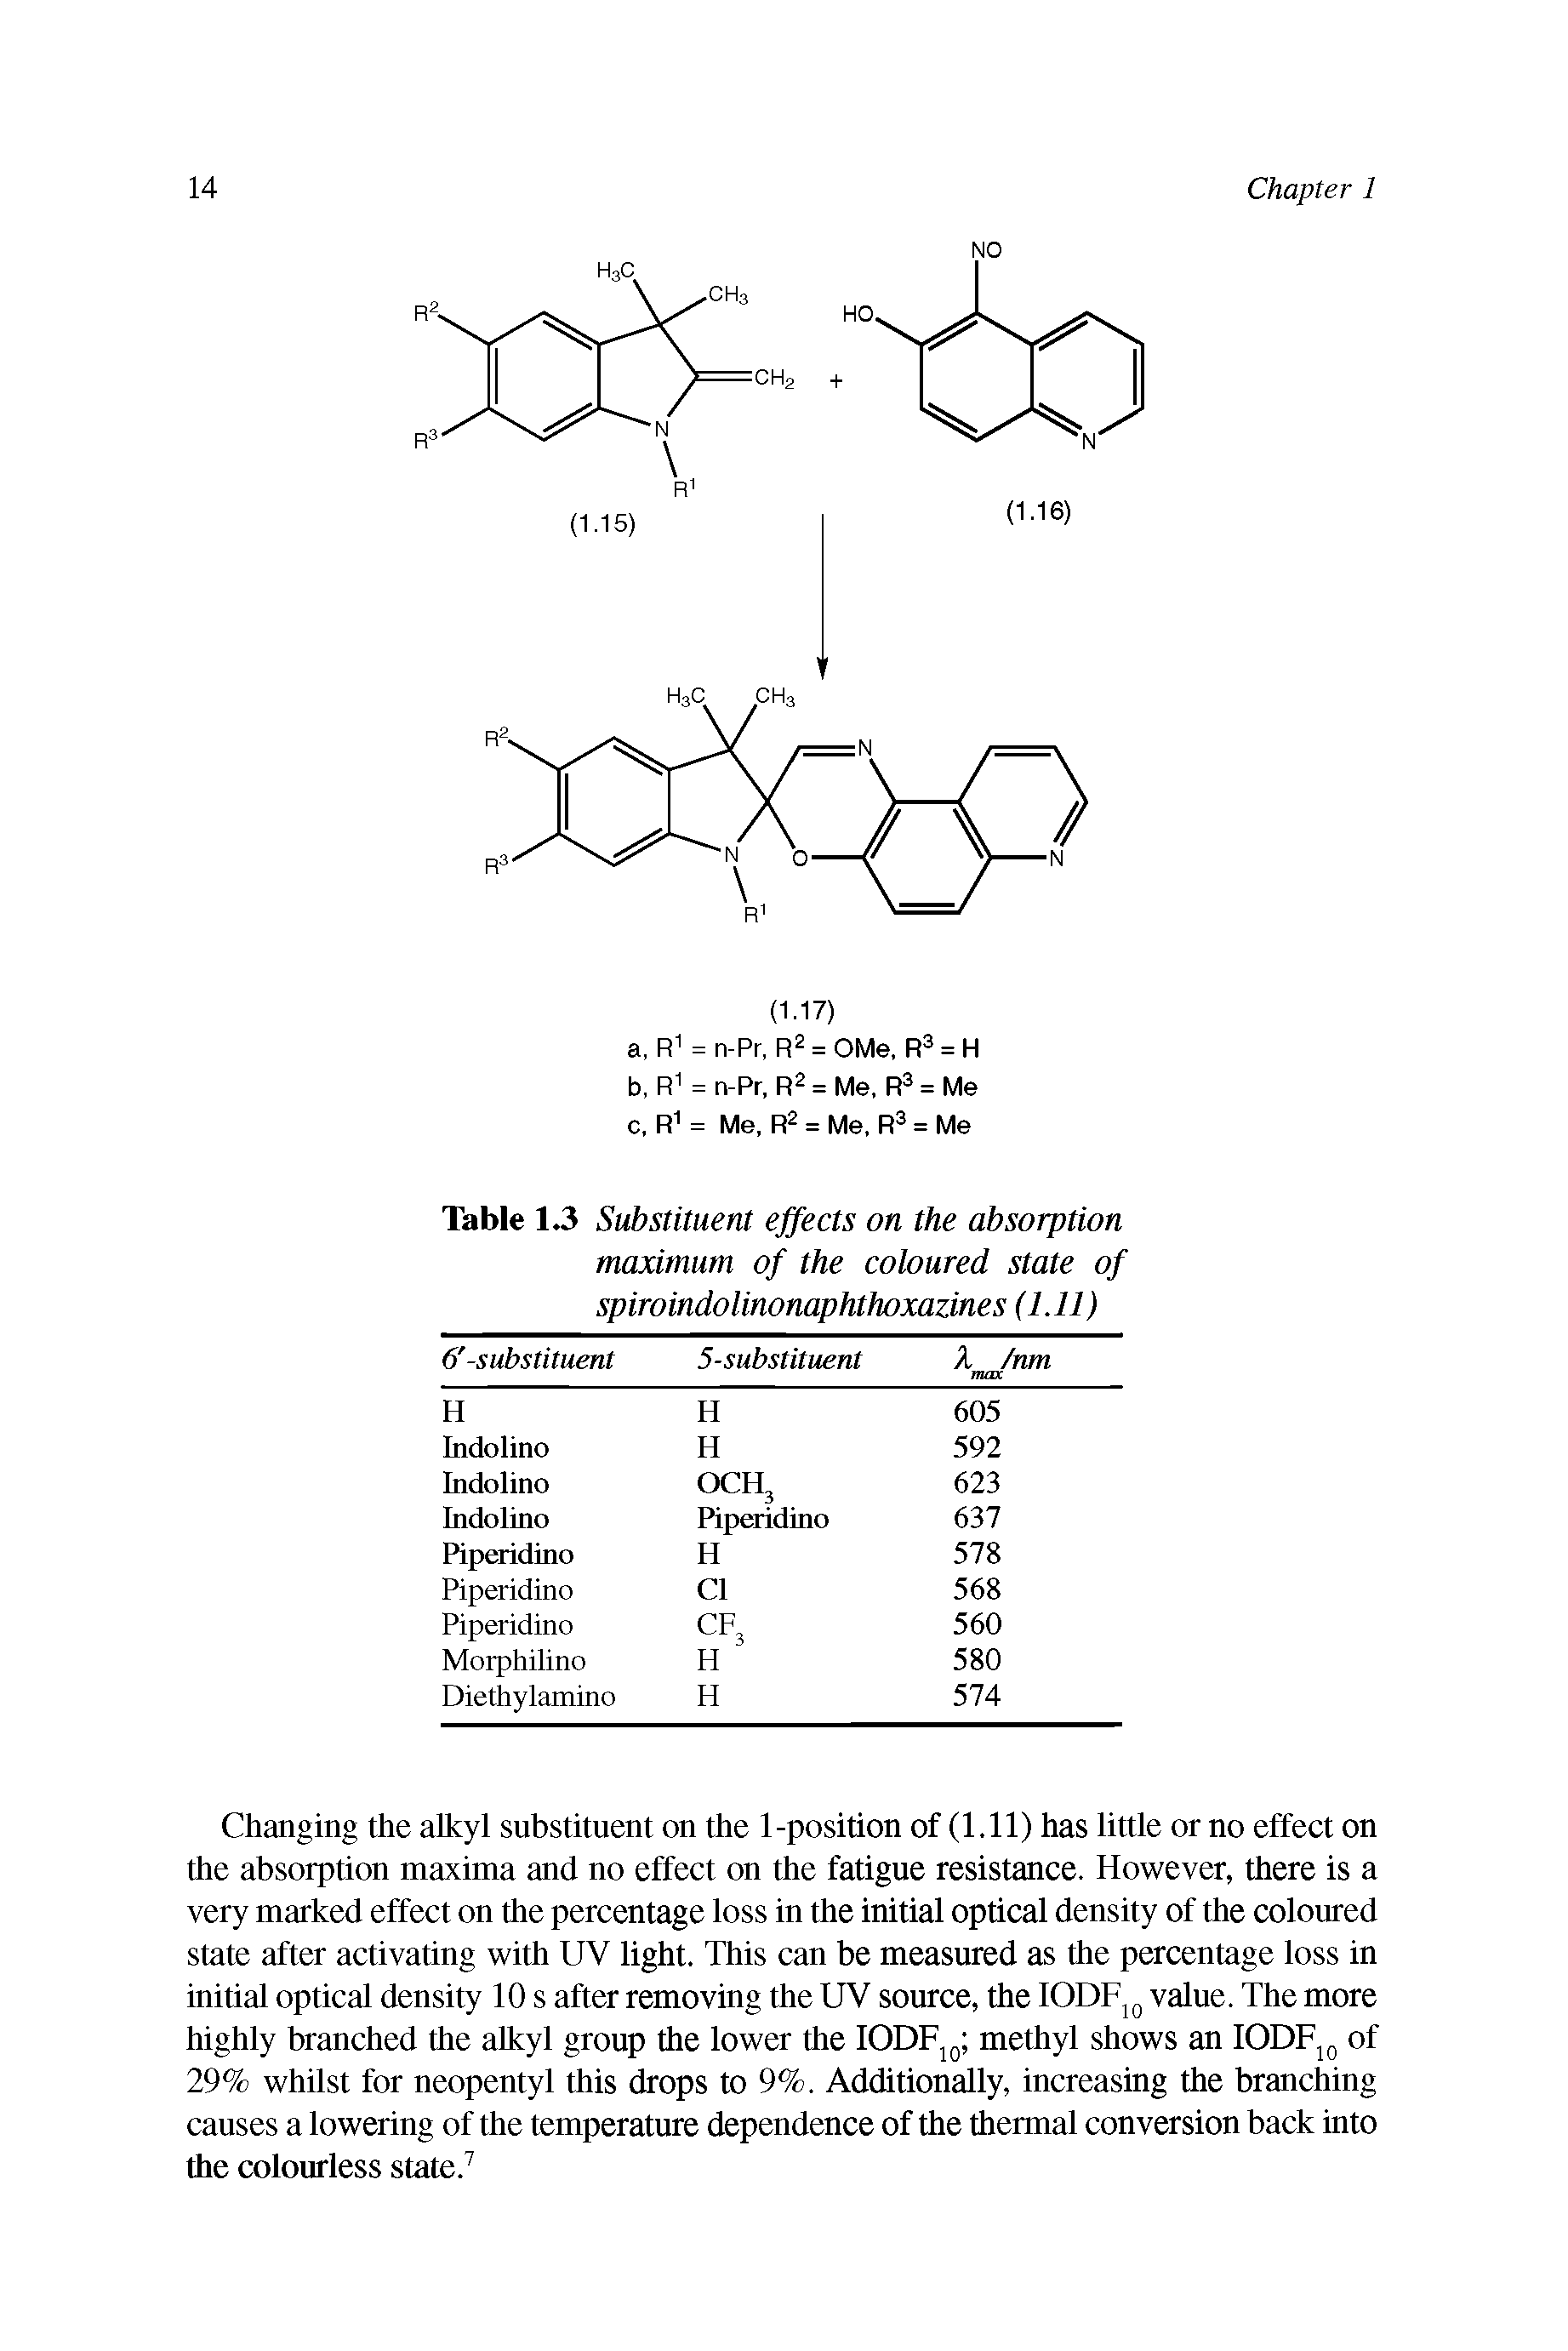 Table 1.3 Substituent effects on the absorption maximum of the coloured state of spiroindolinonaphthoxazines (1.11)...